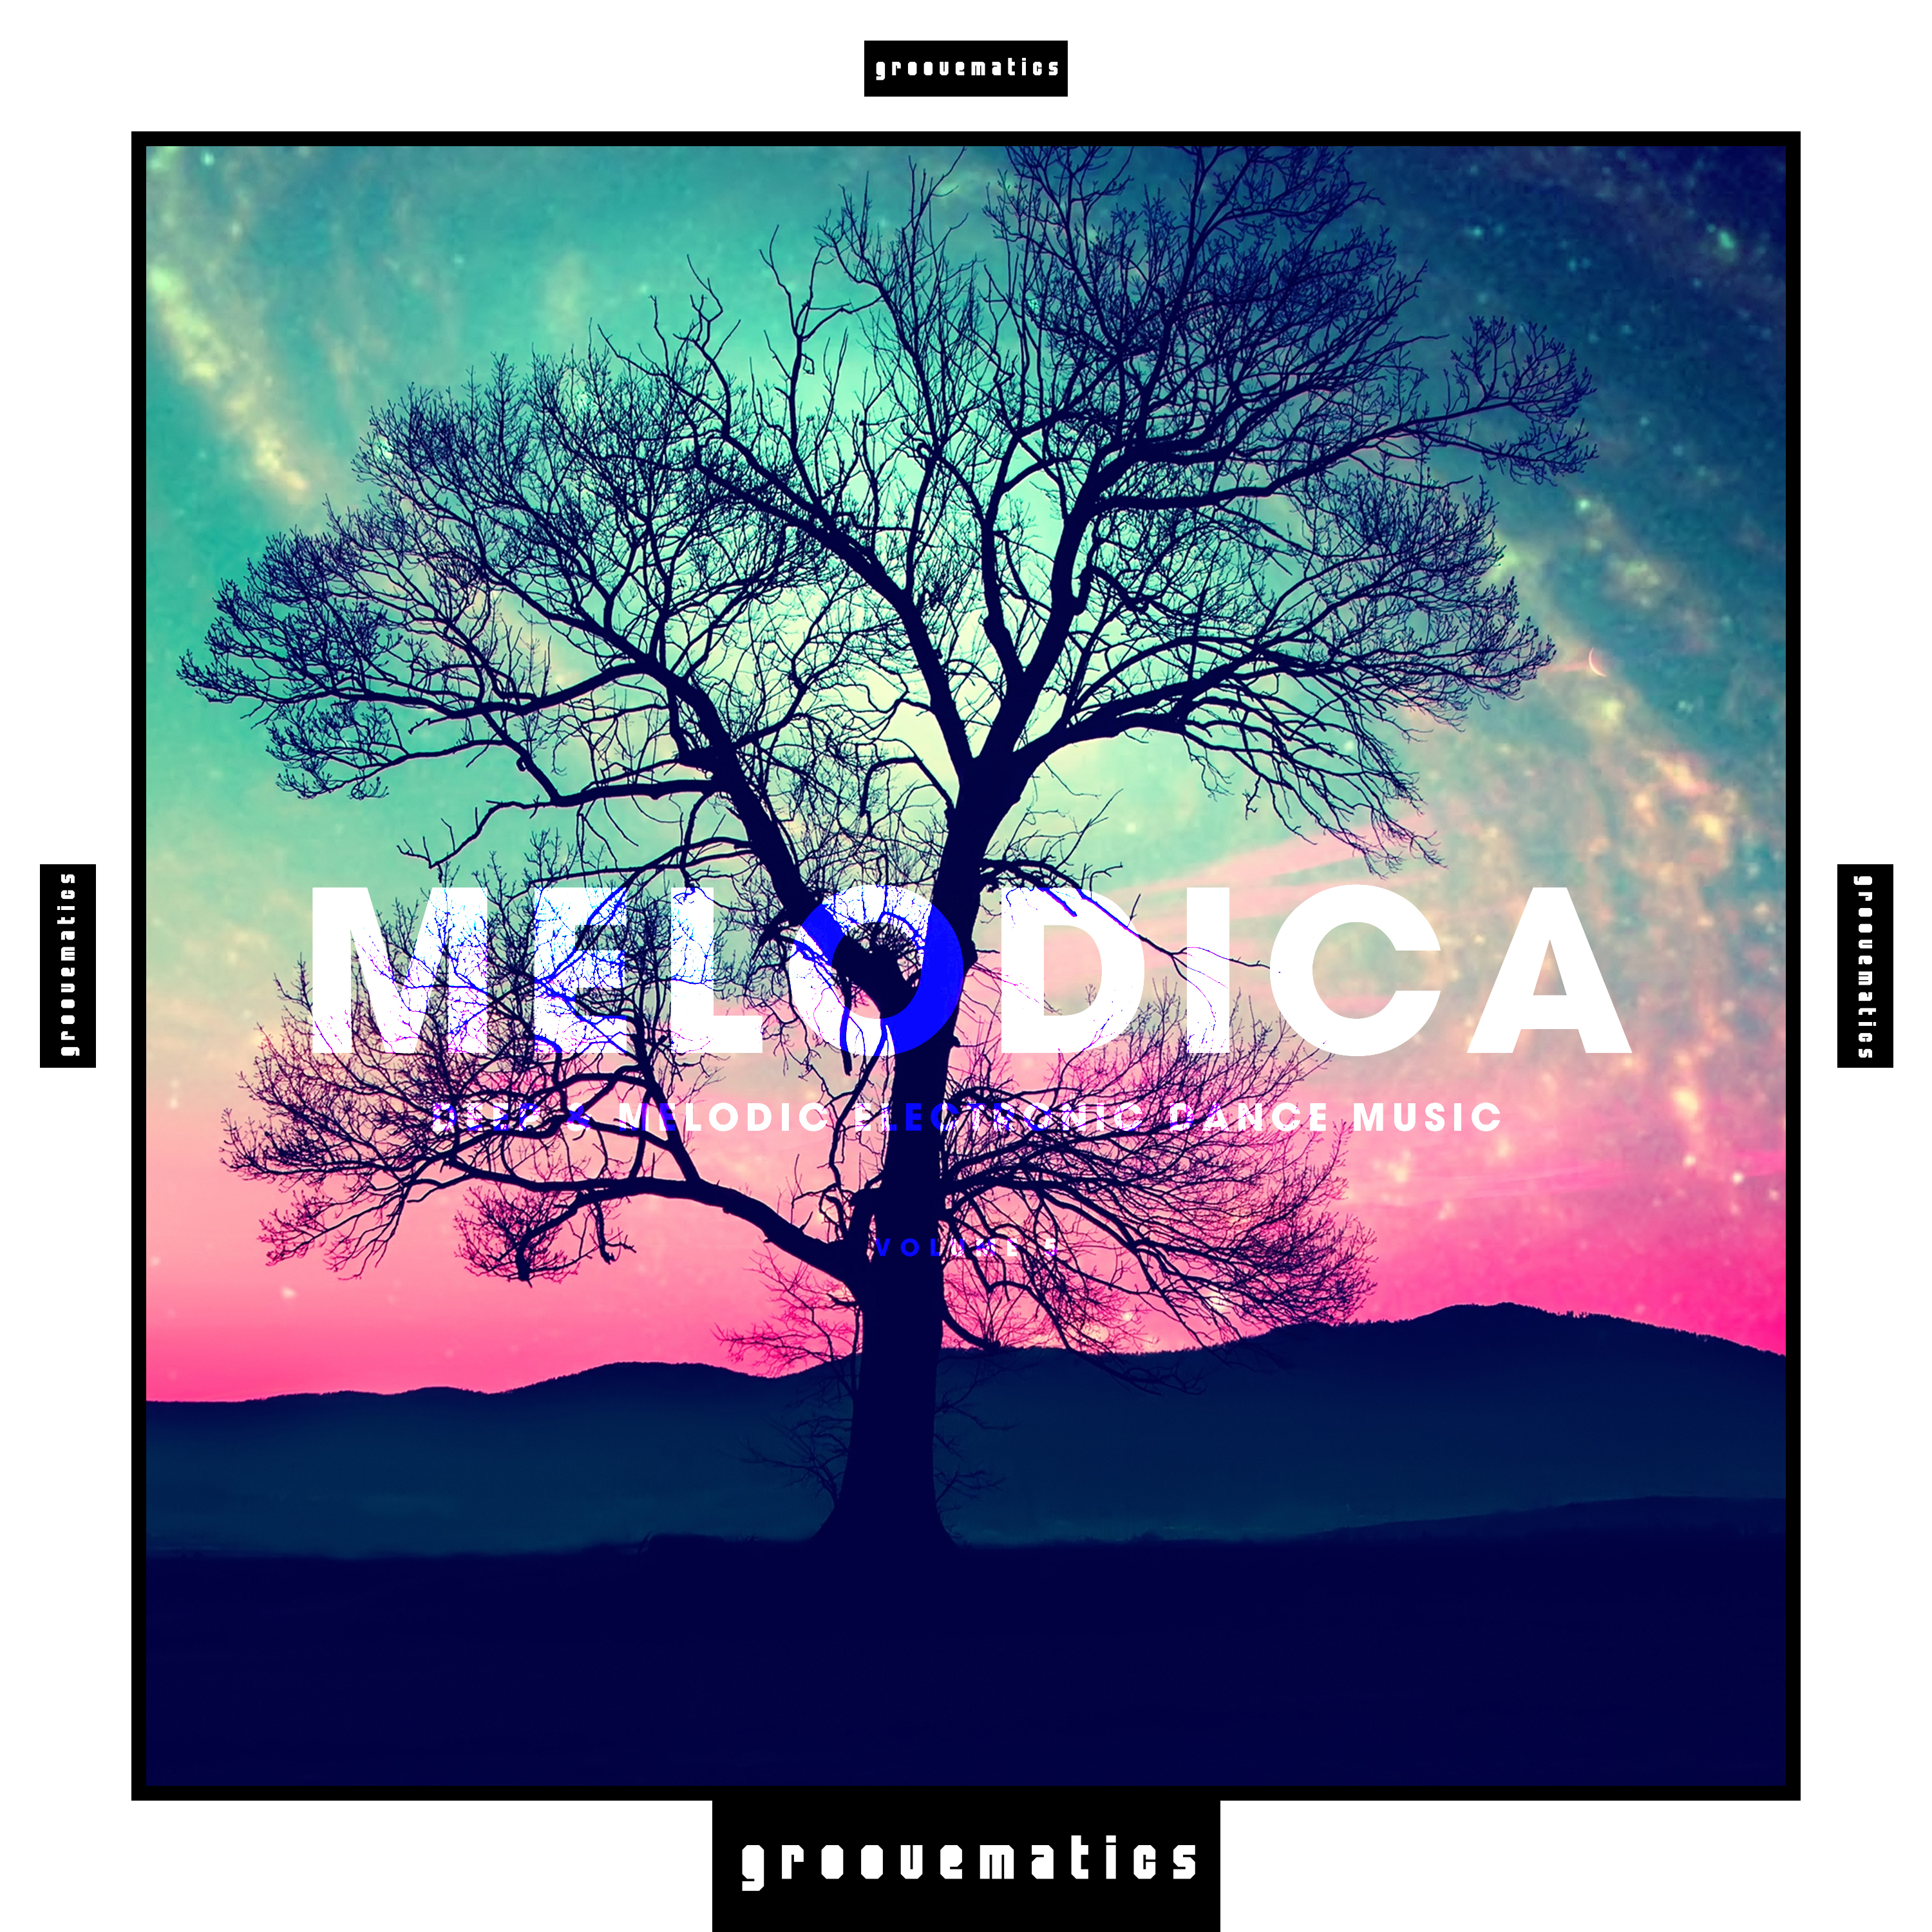 Melodica - (Deep & Melodic Electronic Dance Music), Vol. 5